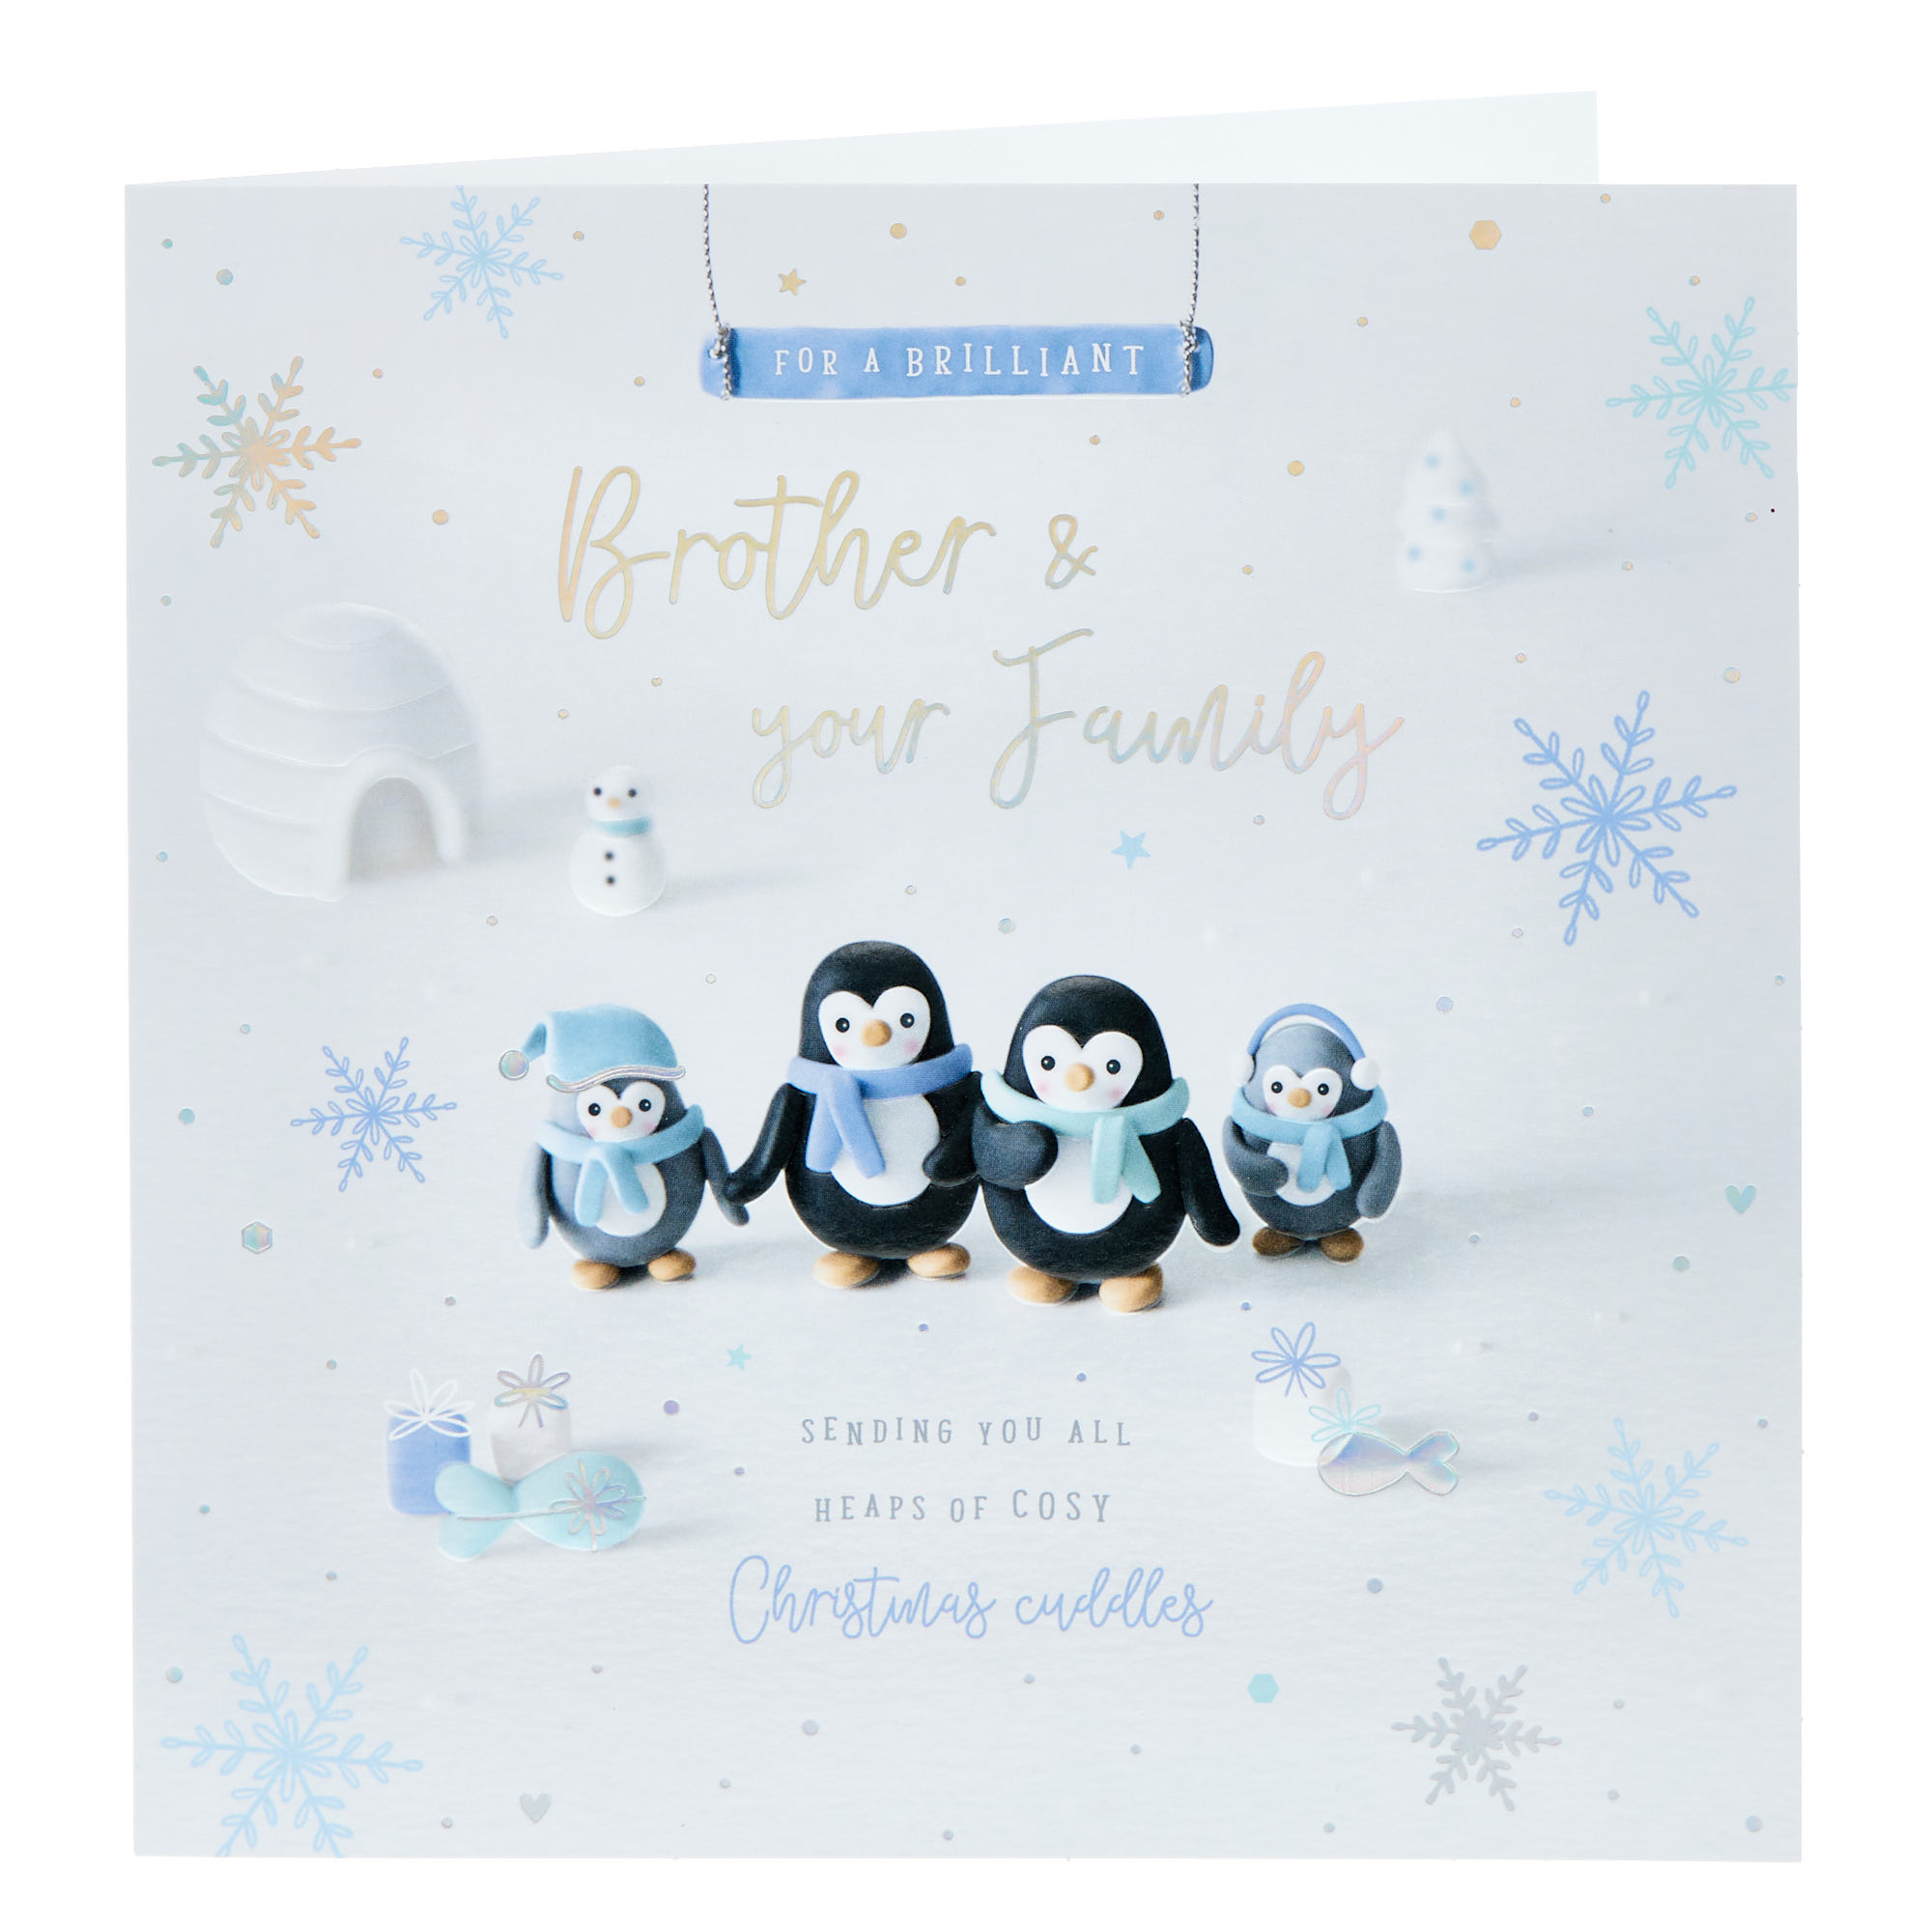 Brother & Family Clay Penguins Christmas Card